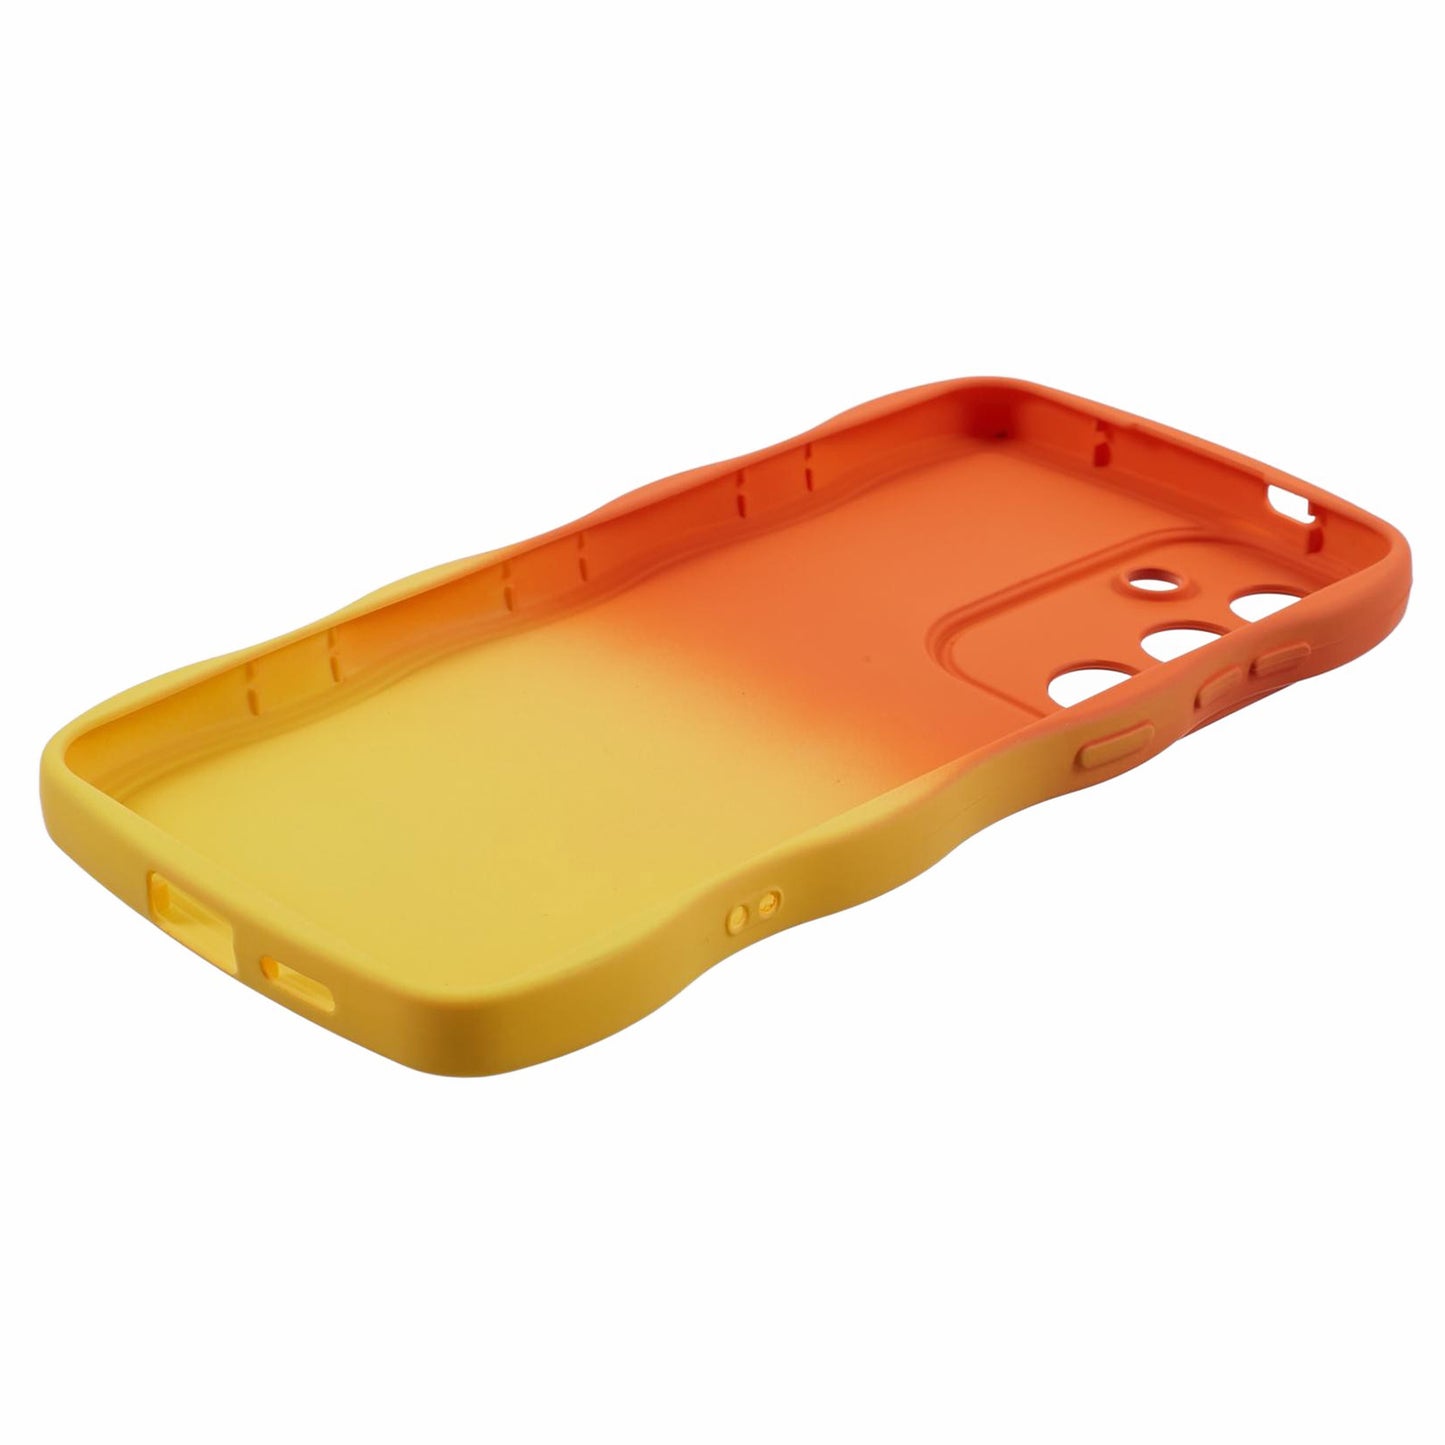 JTW Series Orange/Yellow Phone Case Gradient Dual Colour TPU Cover - For Samsung Galaxy S24